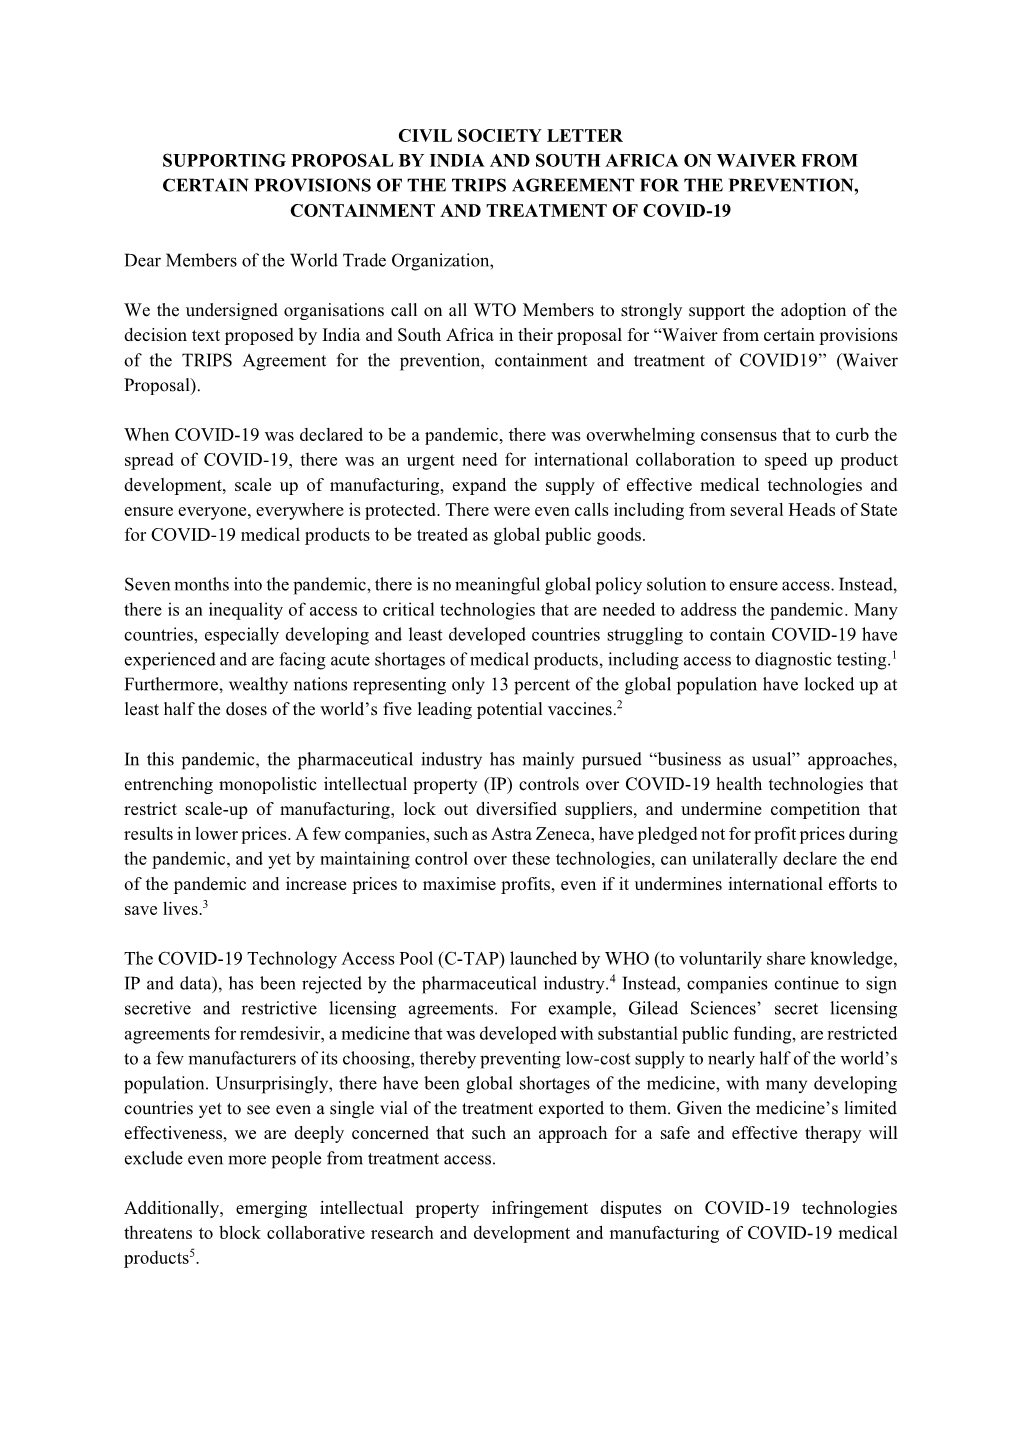 Civil Society Letter Supporting Proposal by India and South Africa on Waiver